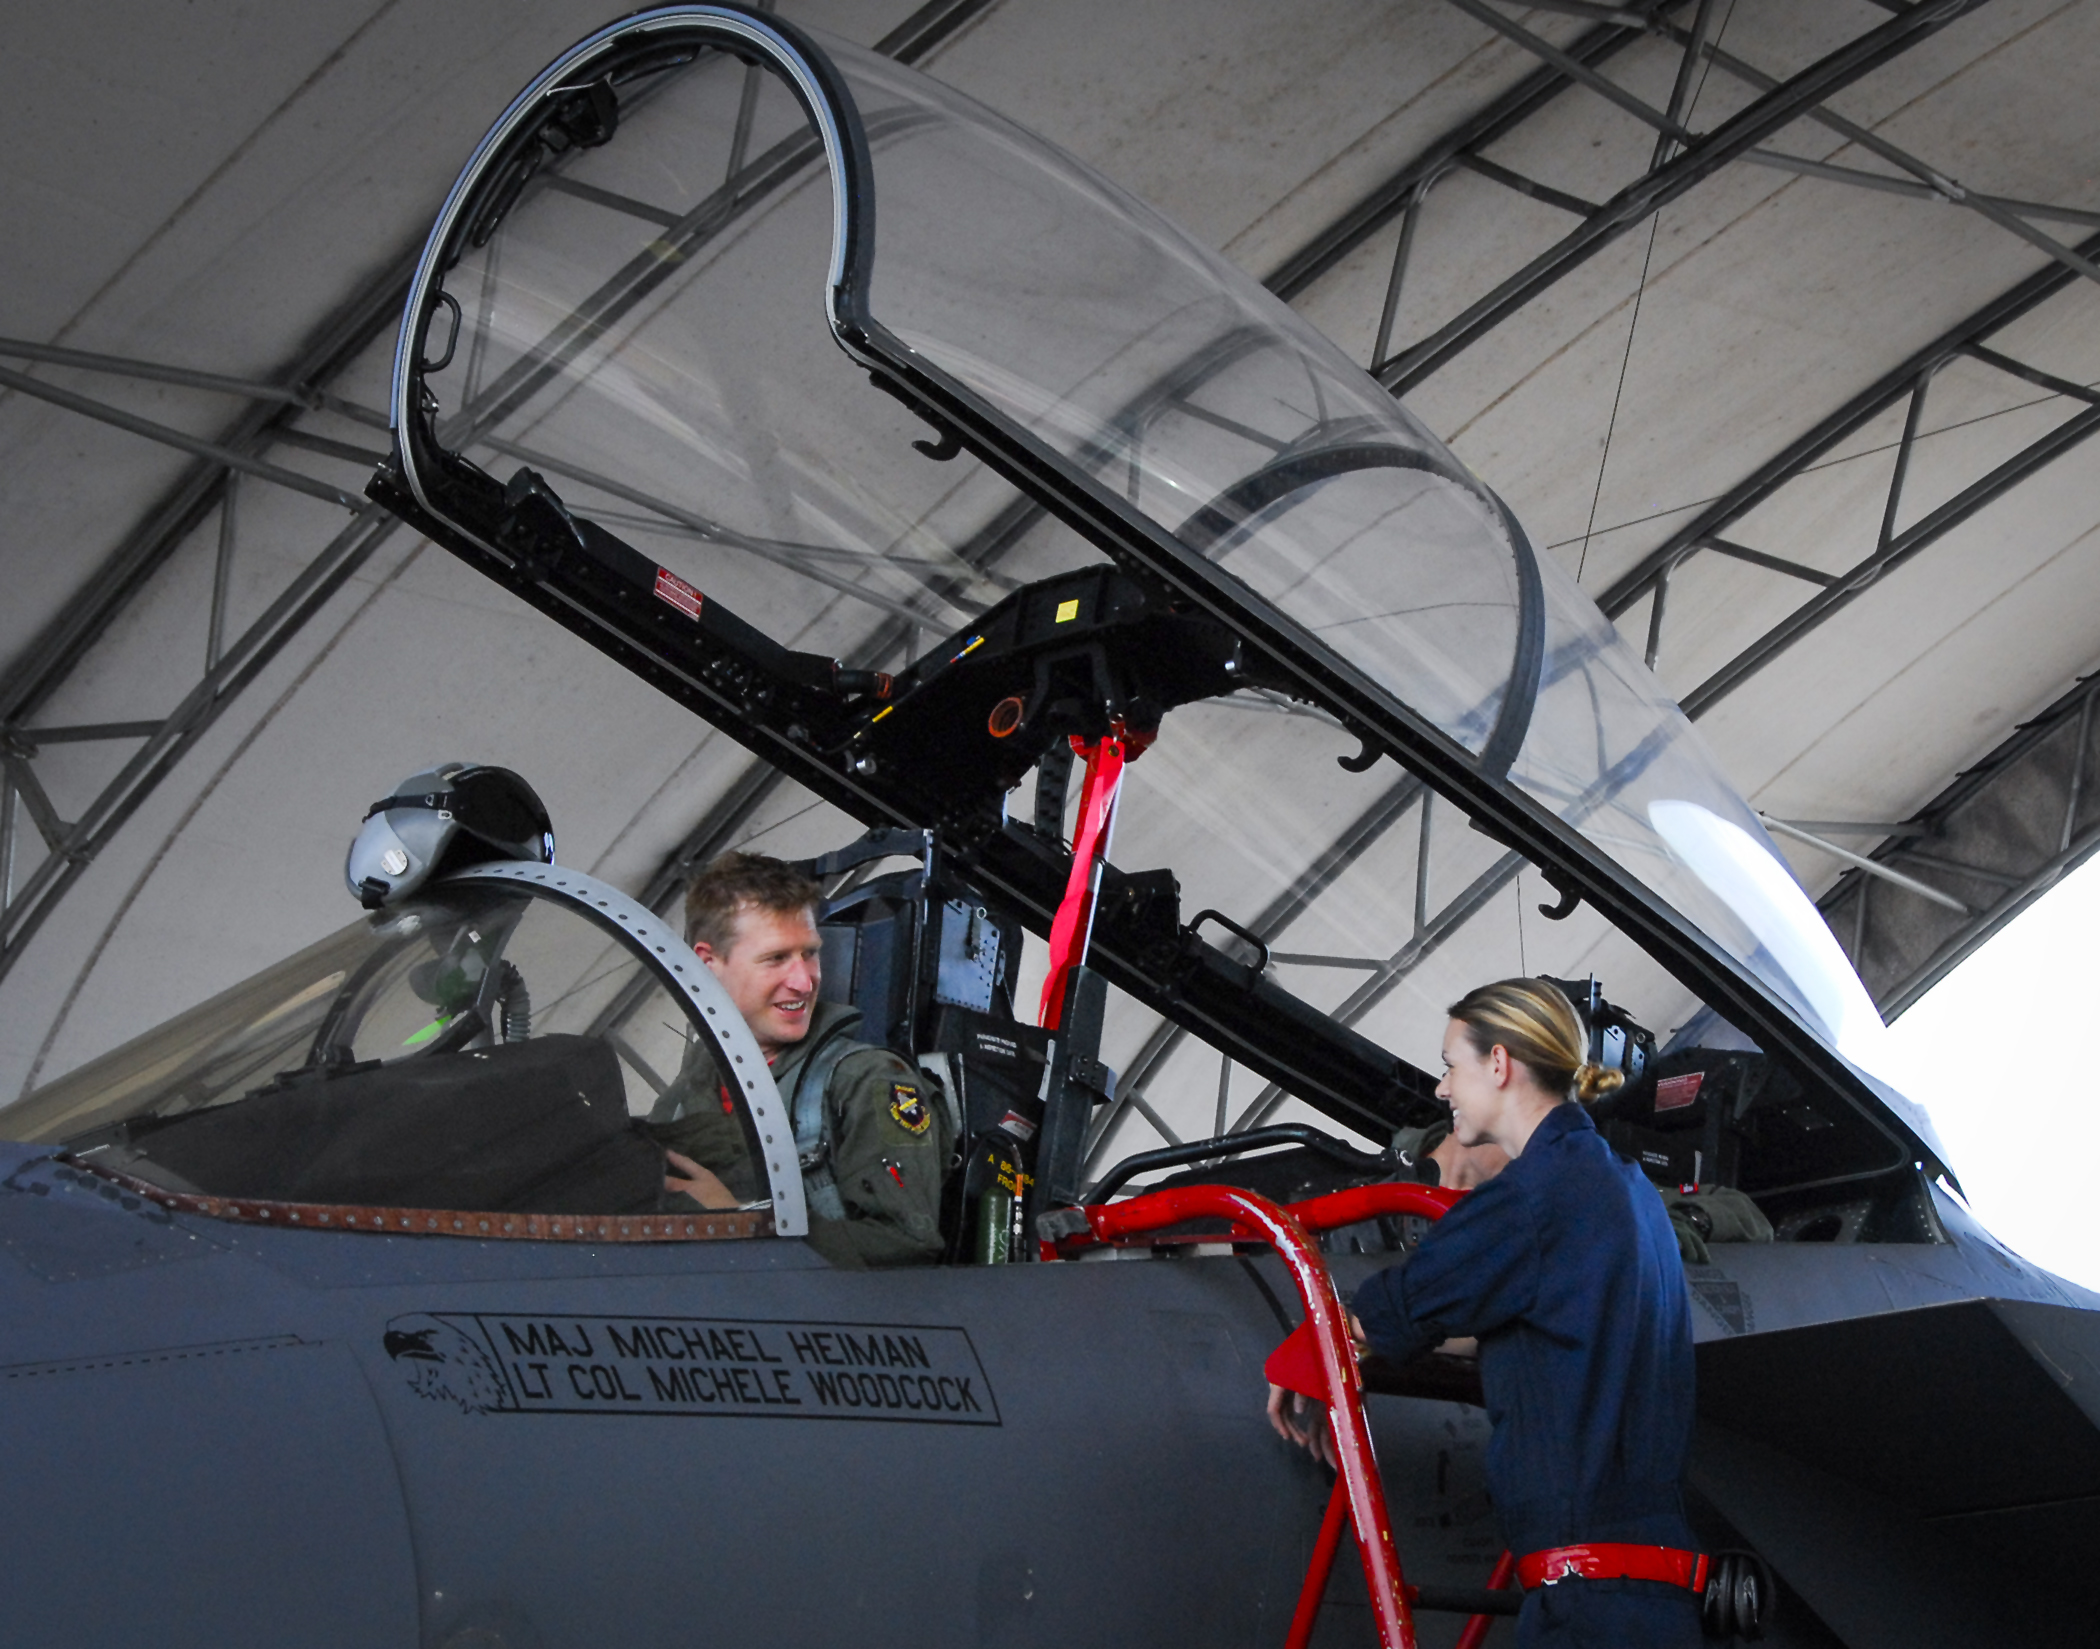 F 15 Unit Tests New Game Changing Processor Eglin Air Force Base Article Display